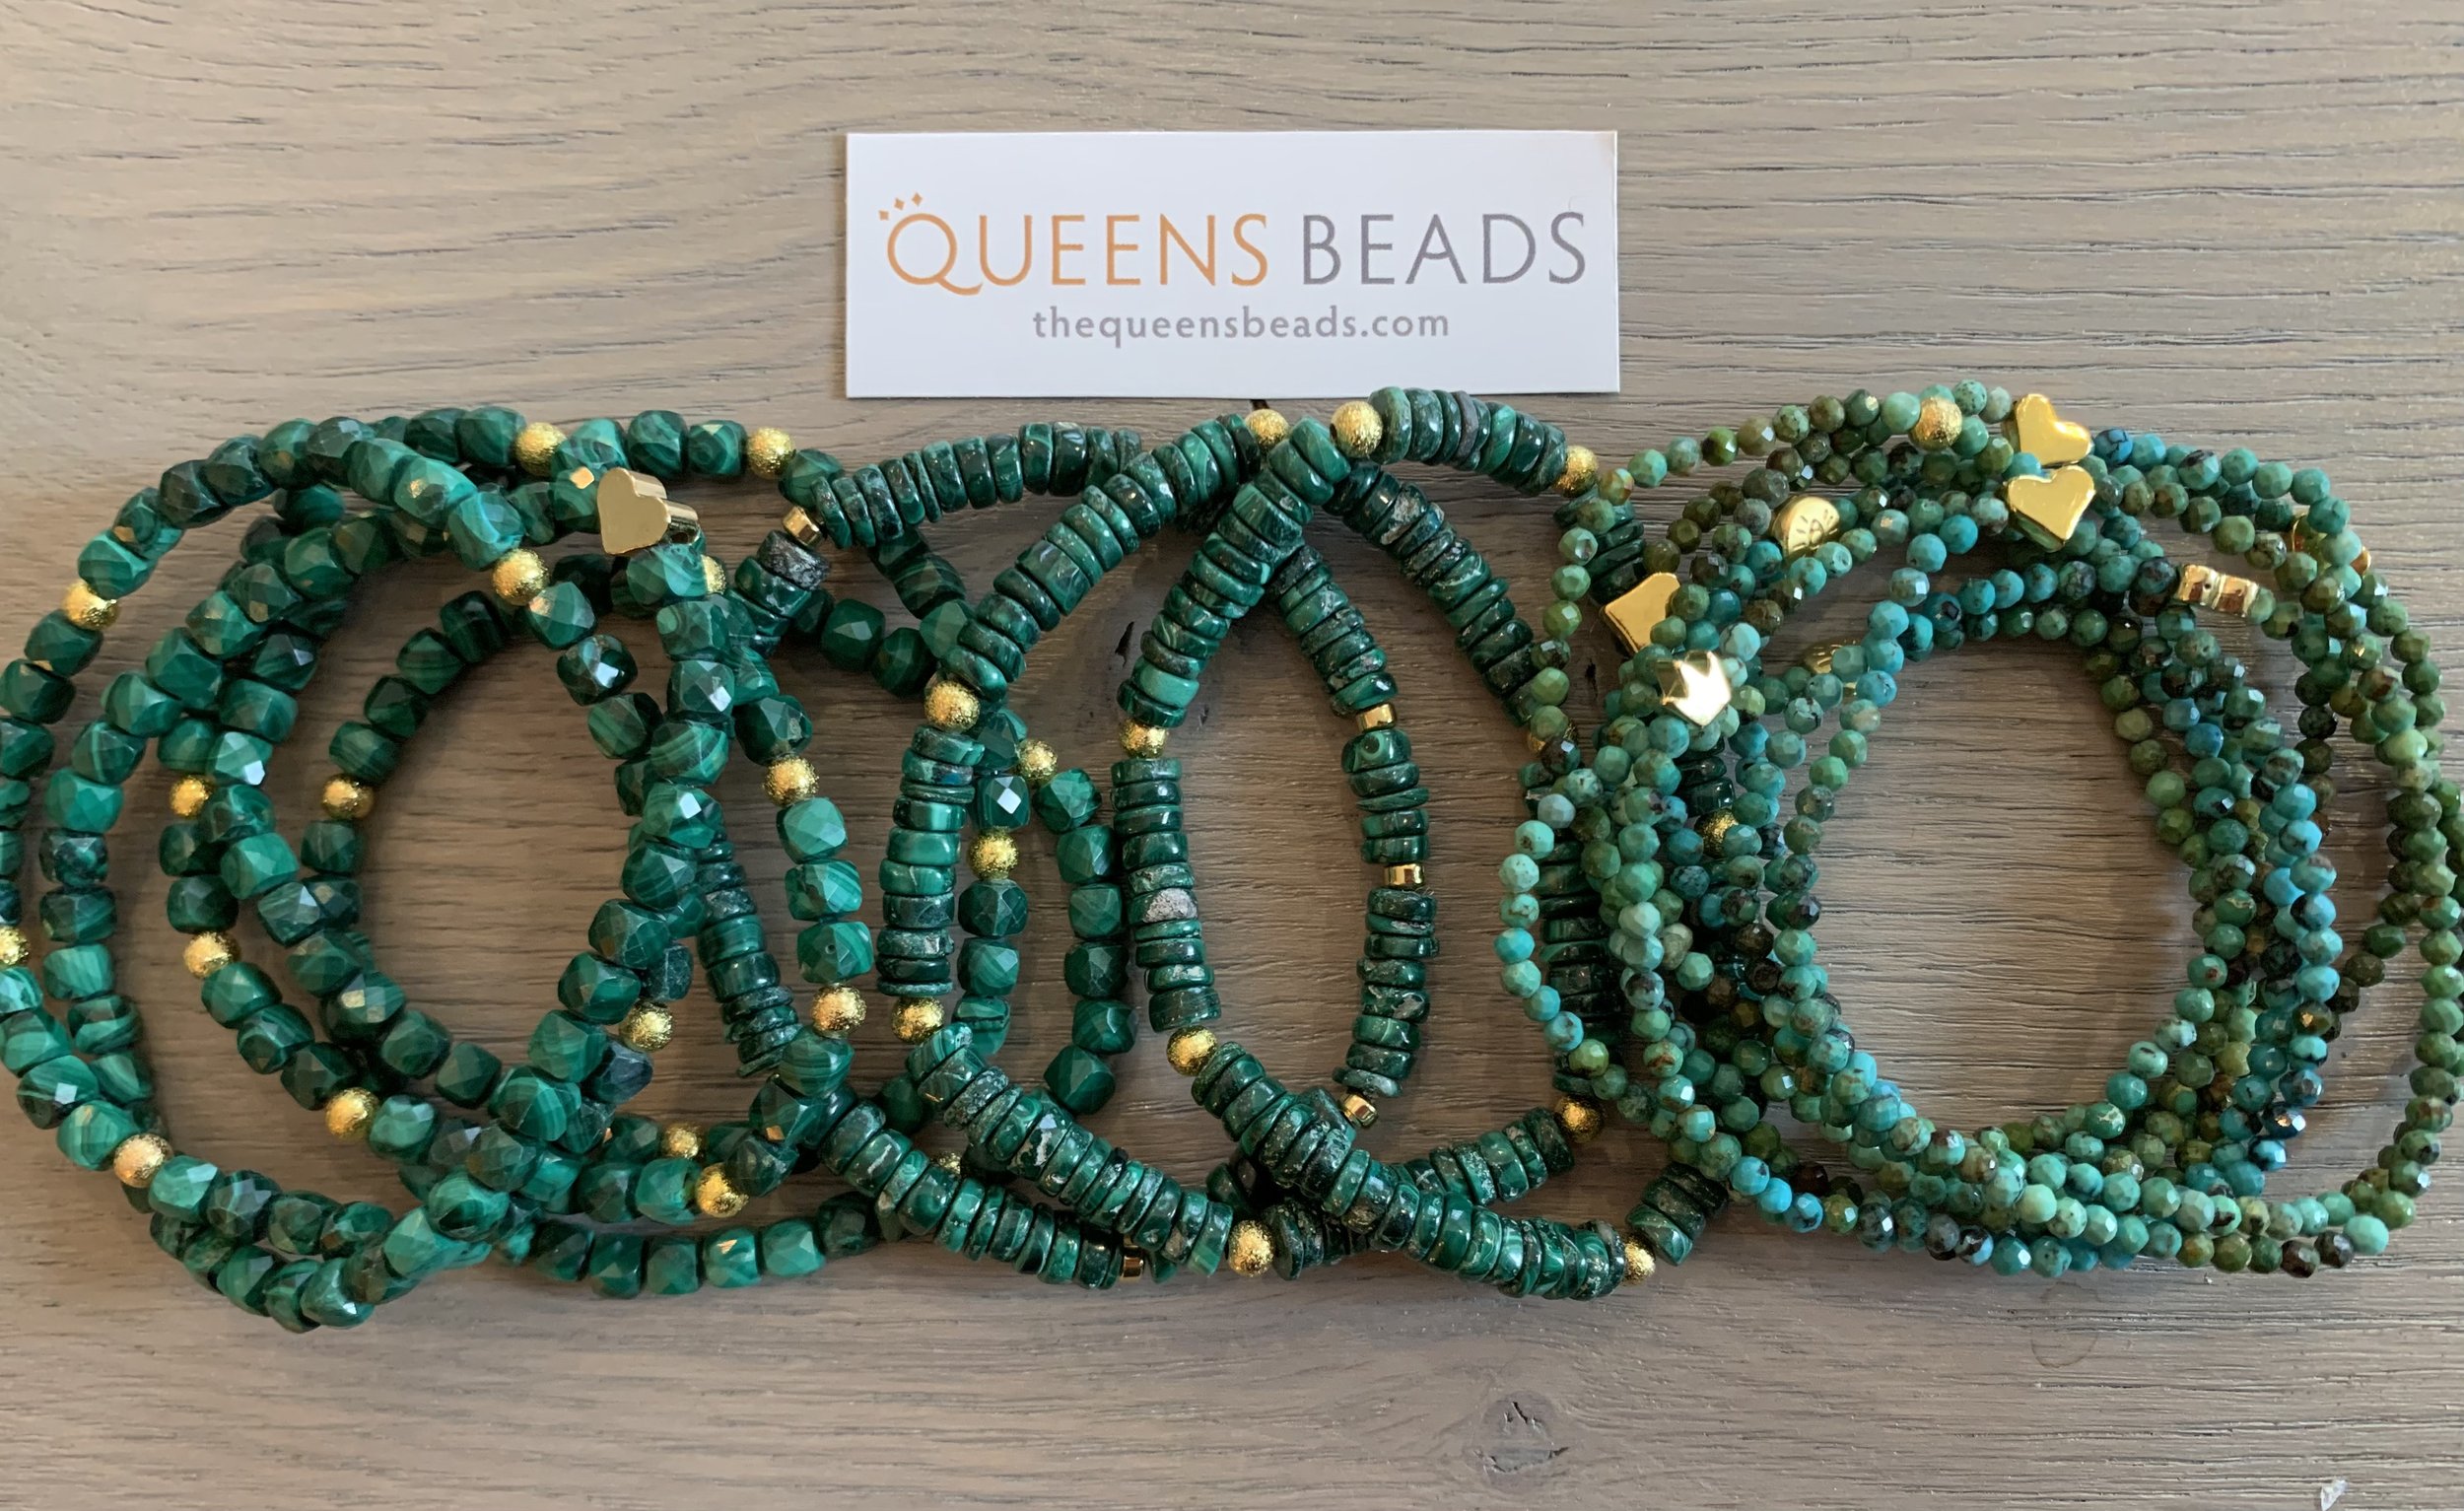 Shopping for Beads on Queen Street West